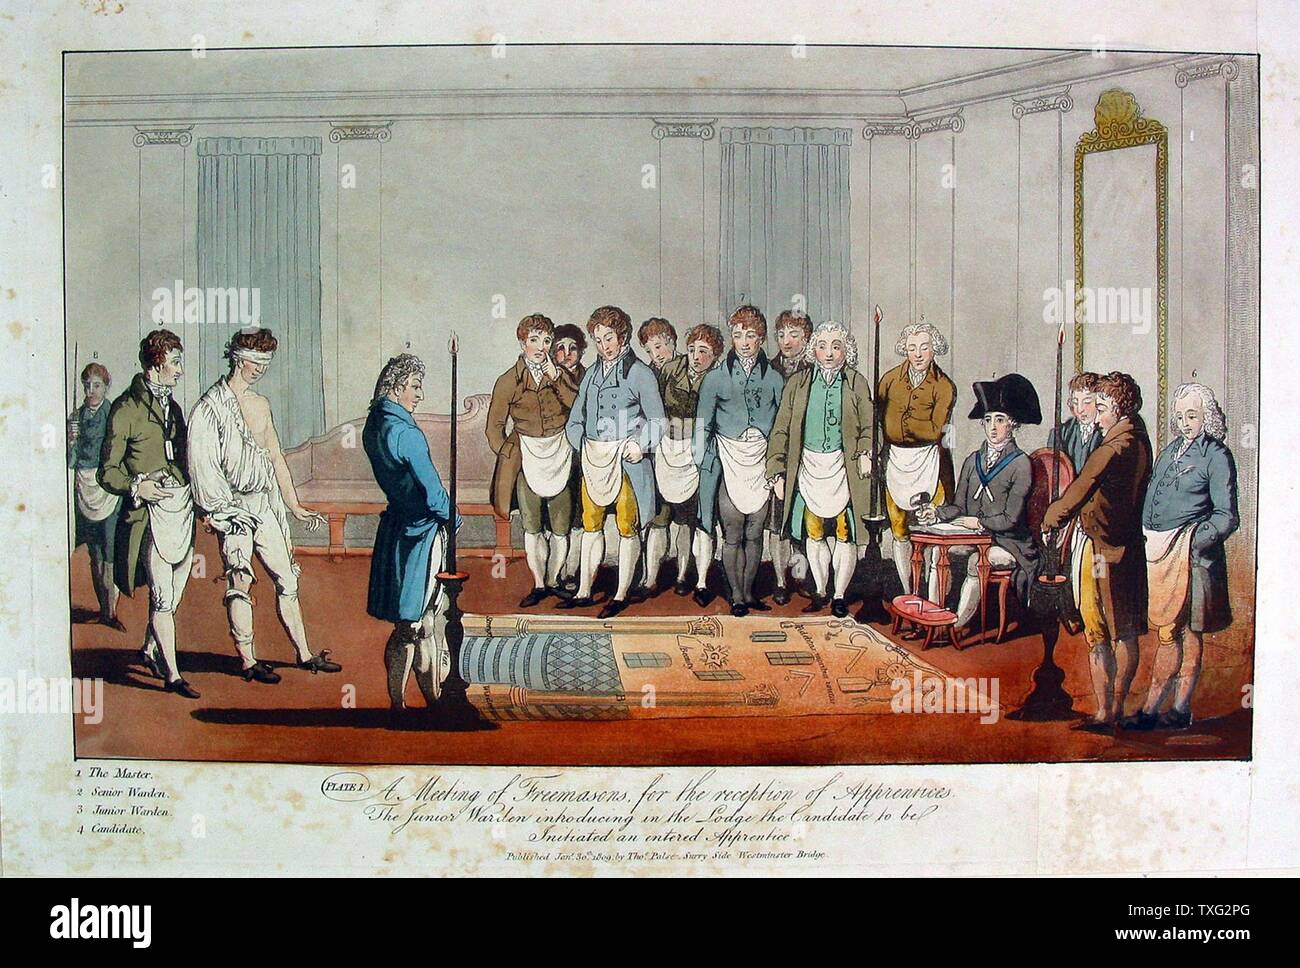 Inauguration of an Apprentice I Early 19th century English lithograph (25 cm x 39 cm) after the French engravers known as 'Gabanon' in the mid 18th century. The applicant is lead into the temple blindfolded. Paris, musée de la Franc-Maçonnerie Stock Photo